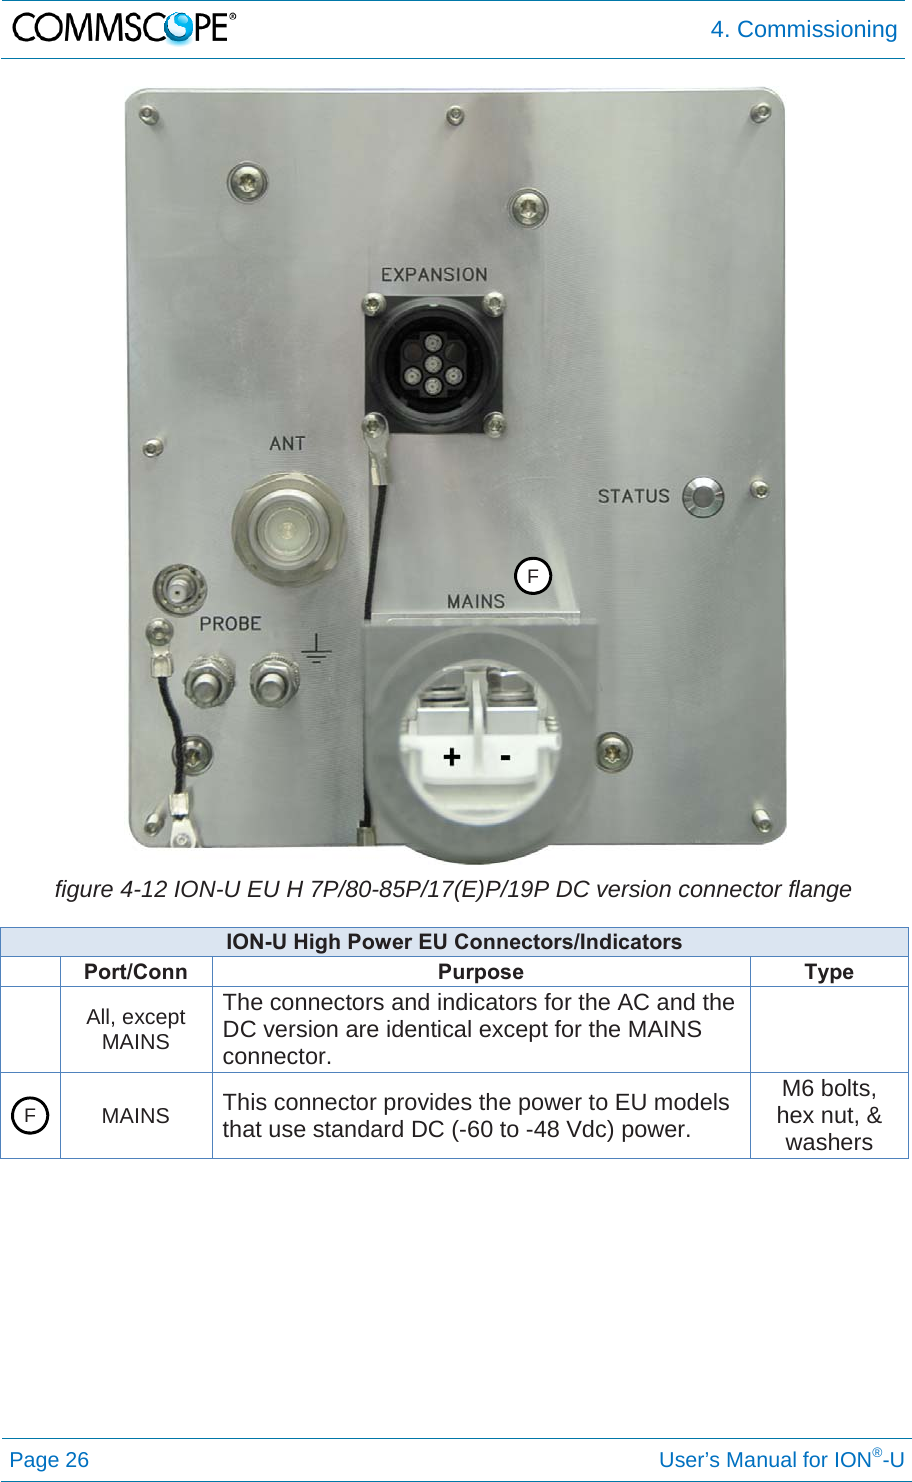  4. Commissioning Page 26     User’s Manual for ION®-U  figure 4-12 ION-U EU H 7P/80-85P/17(E)P/19P DC version connector flange ION-U High Power EU Connectors/Indicators  Port/Conn  Purpose  Type  All, except MAINS The connectors and indicators for the AC and the DC version are identical except for the MAINS connector.    MAINS  This connector provides the power to EU models that use standard DC (-60 to -48 Vdc) power. M6 bolts, hex nut, &amp; washers  F F